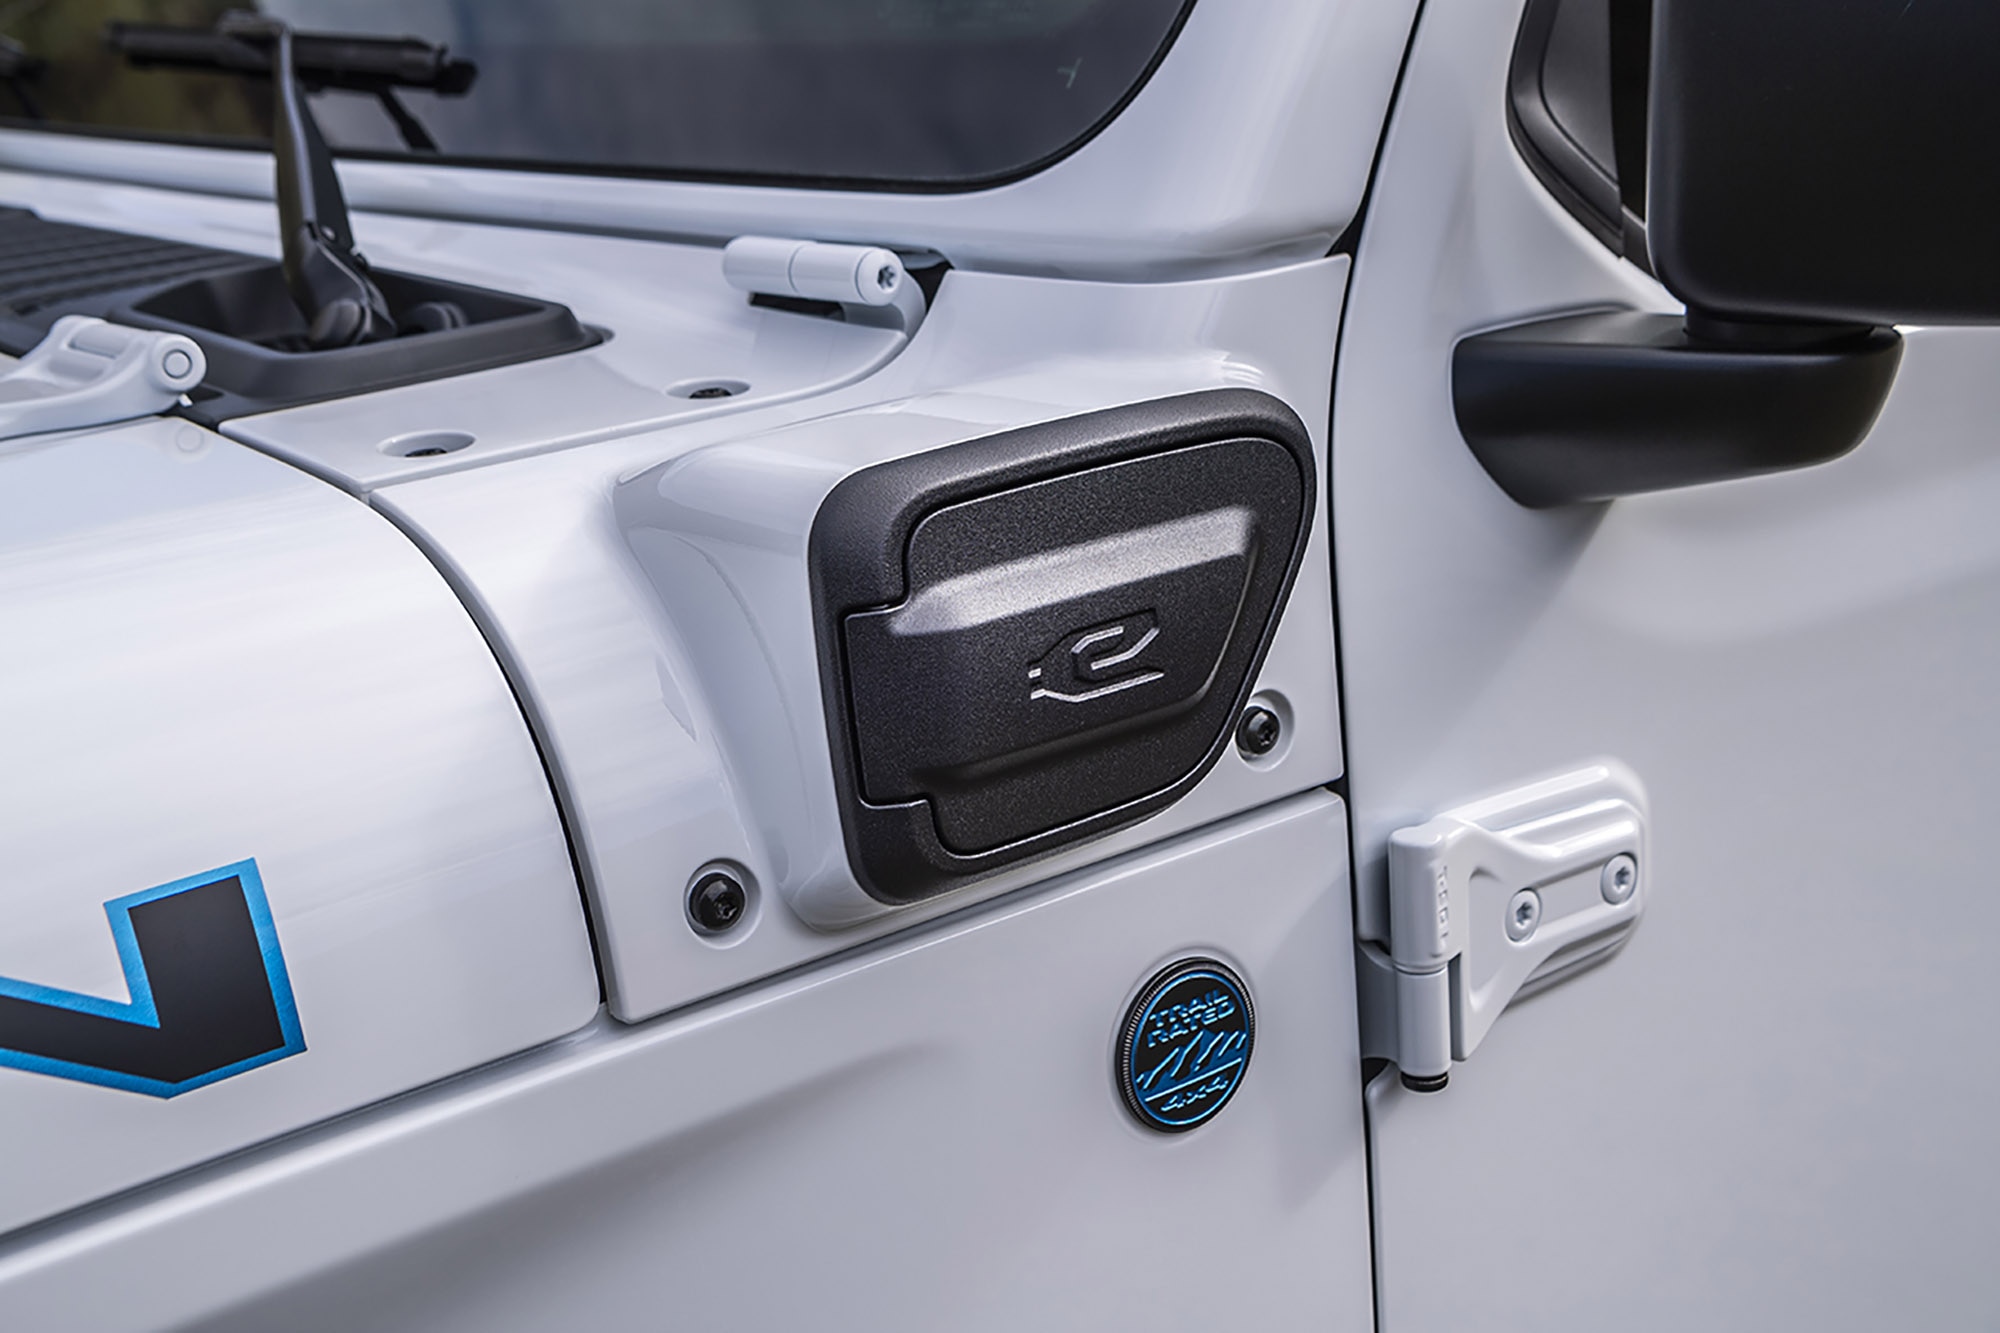 Detail shot of the charging port on a white Jeep Wrangler 4xe